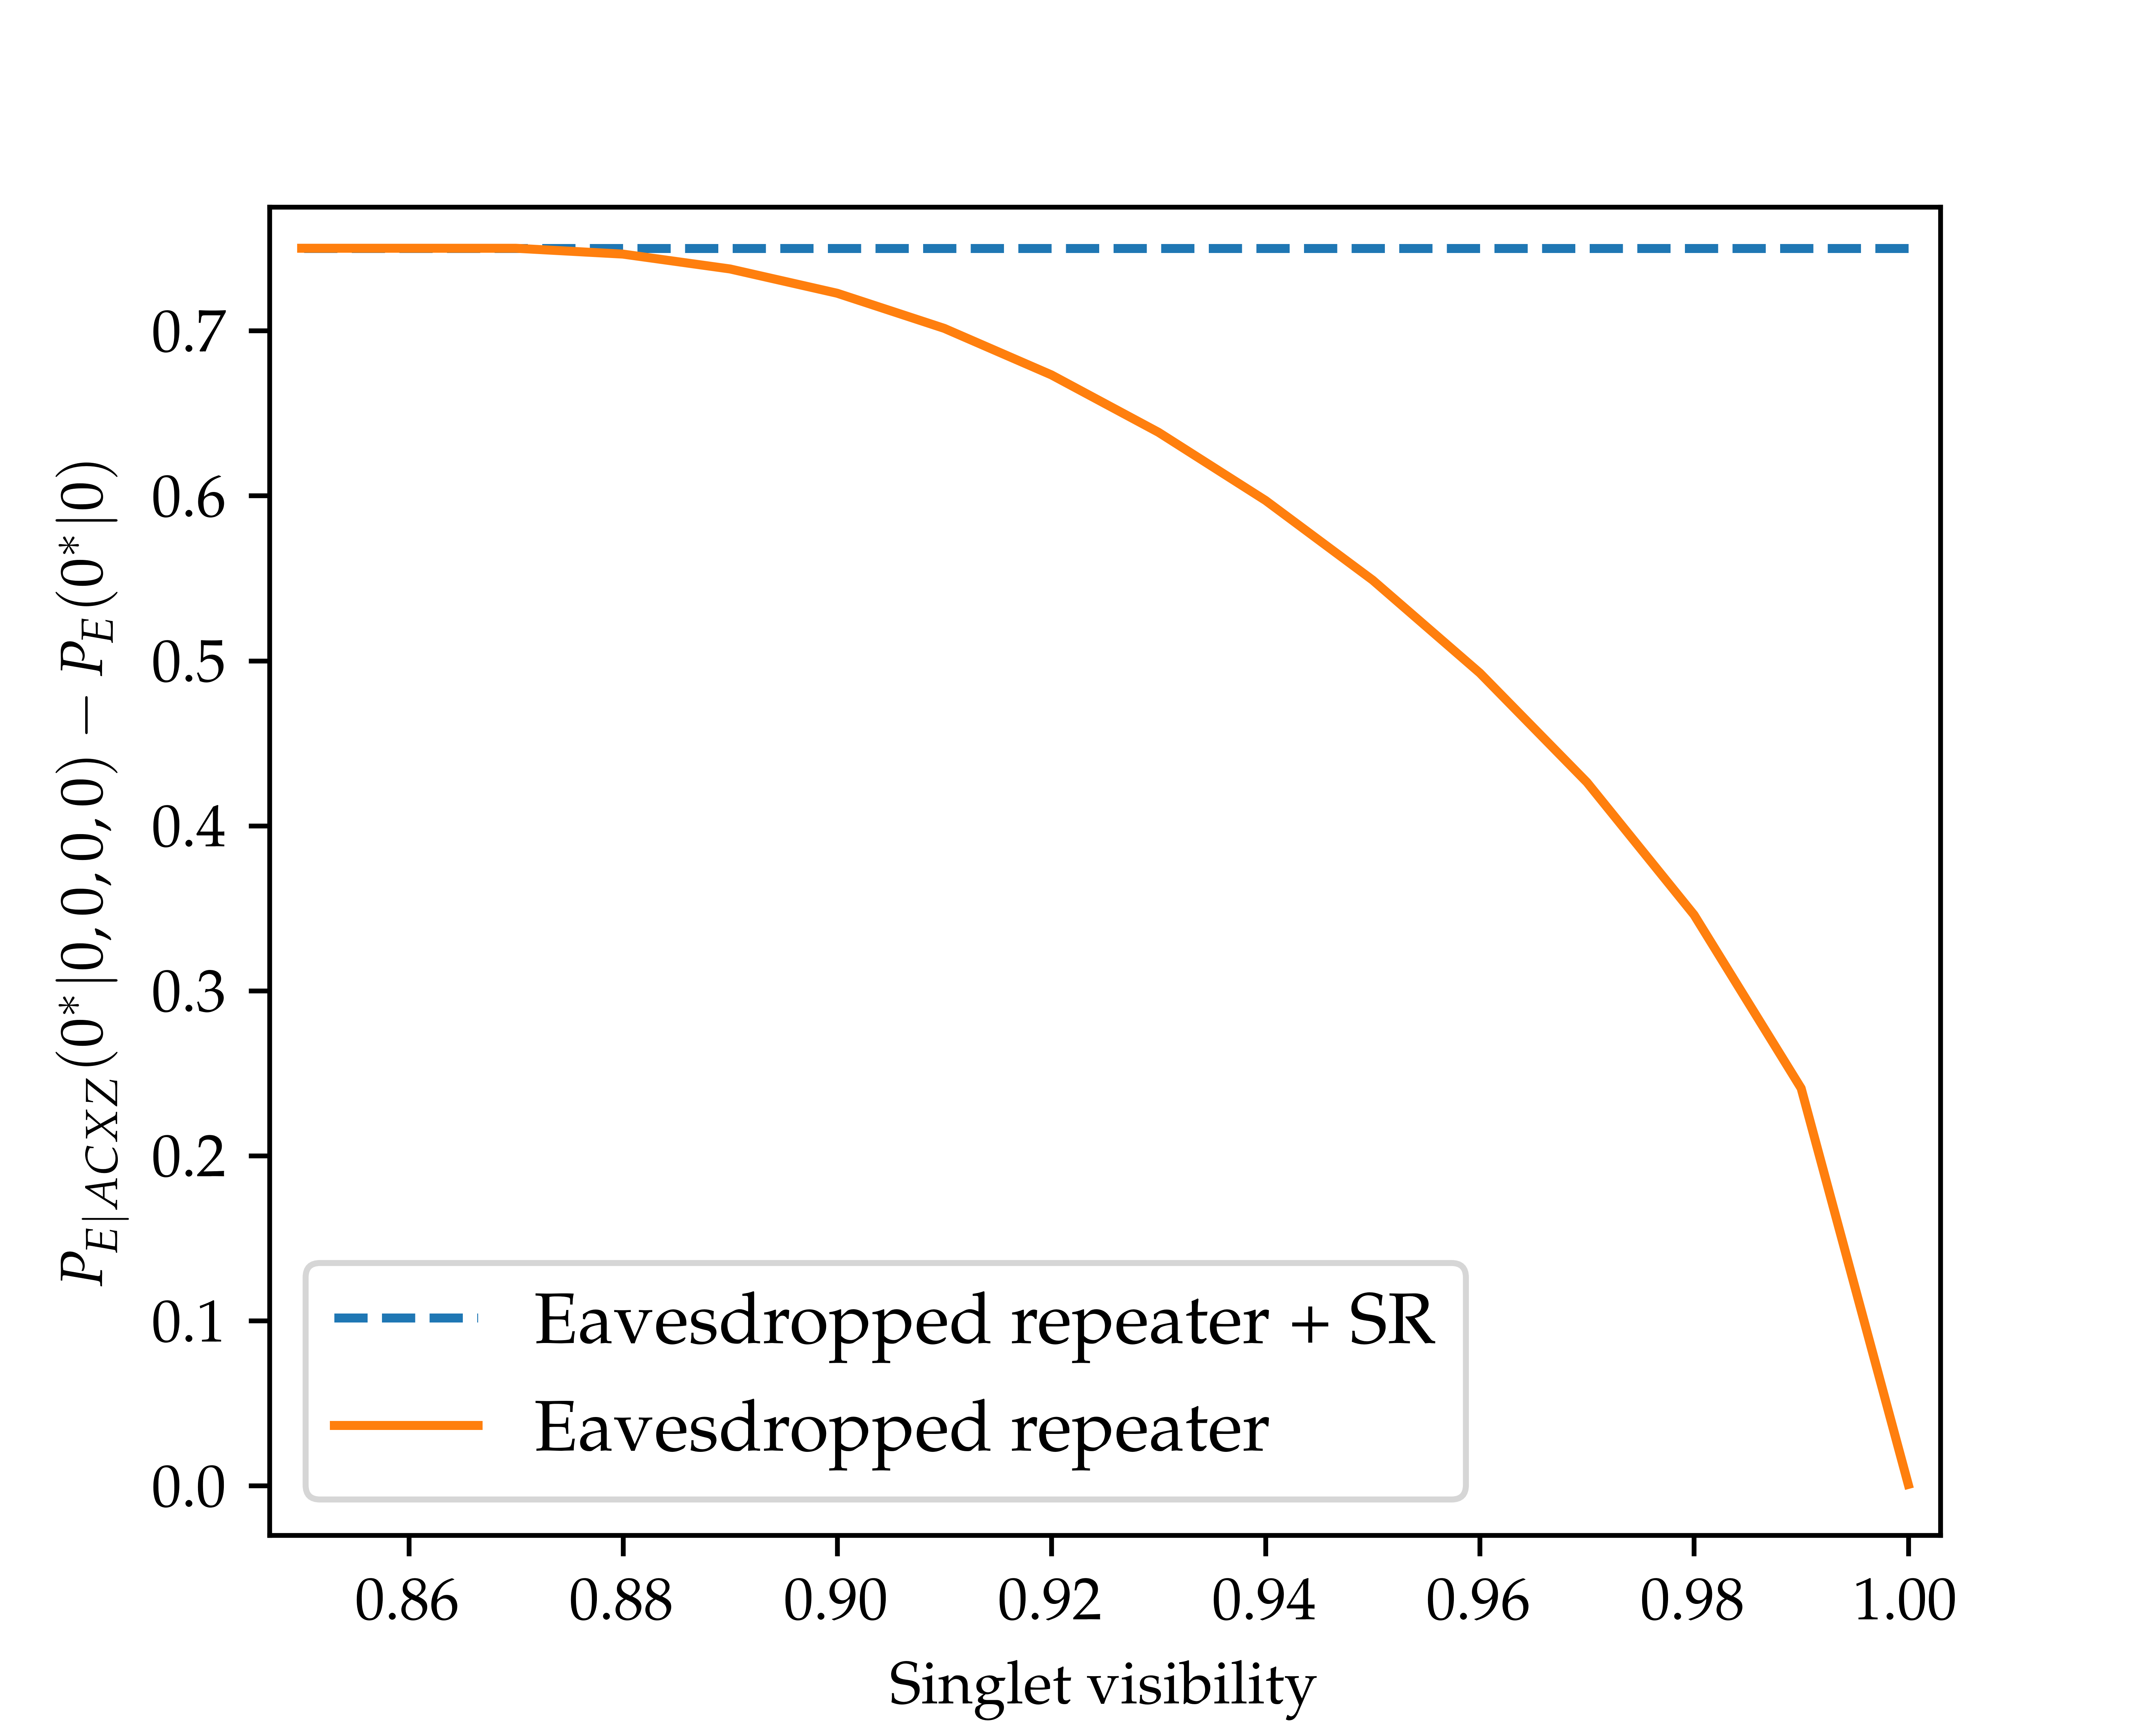 eavesdropped repeater results